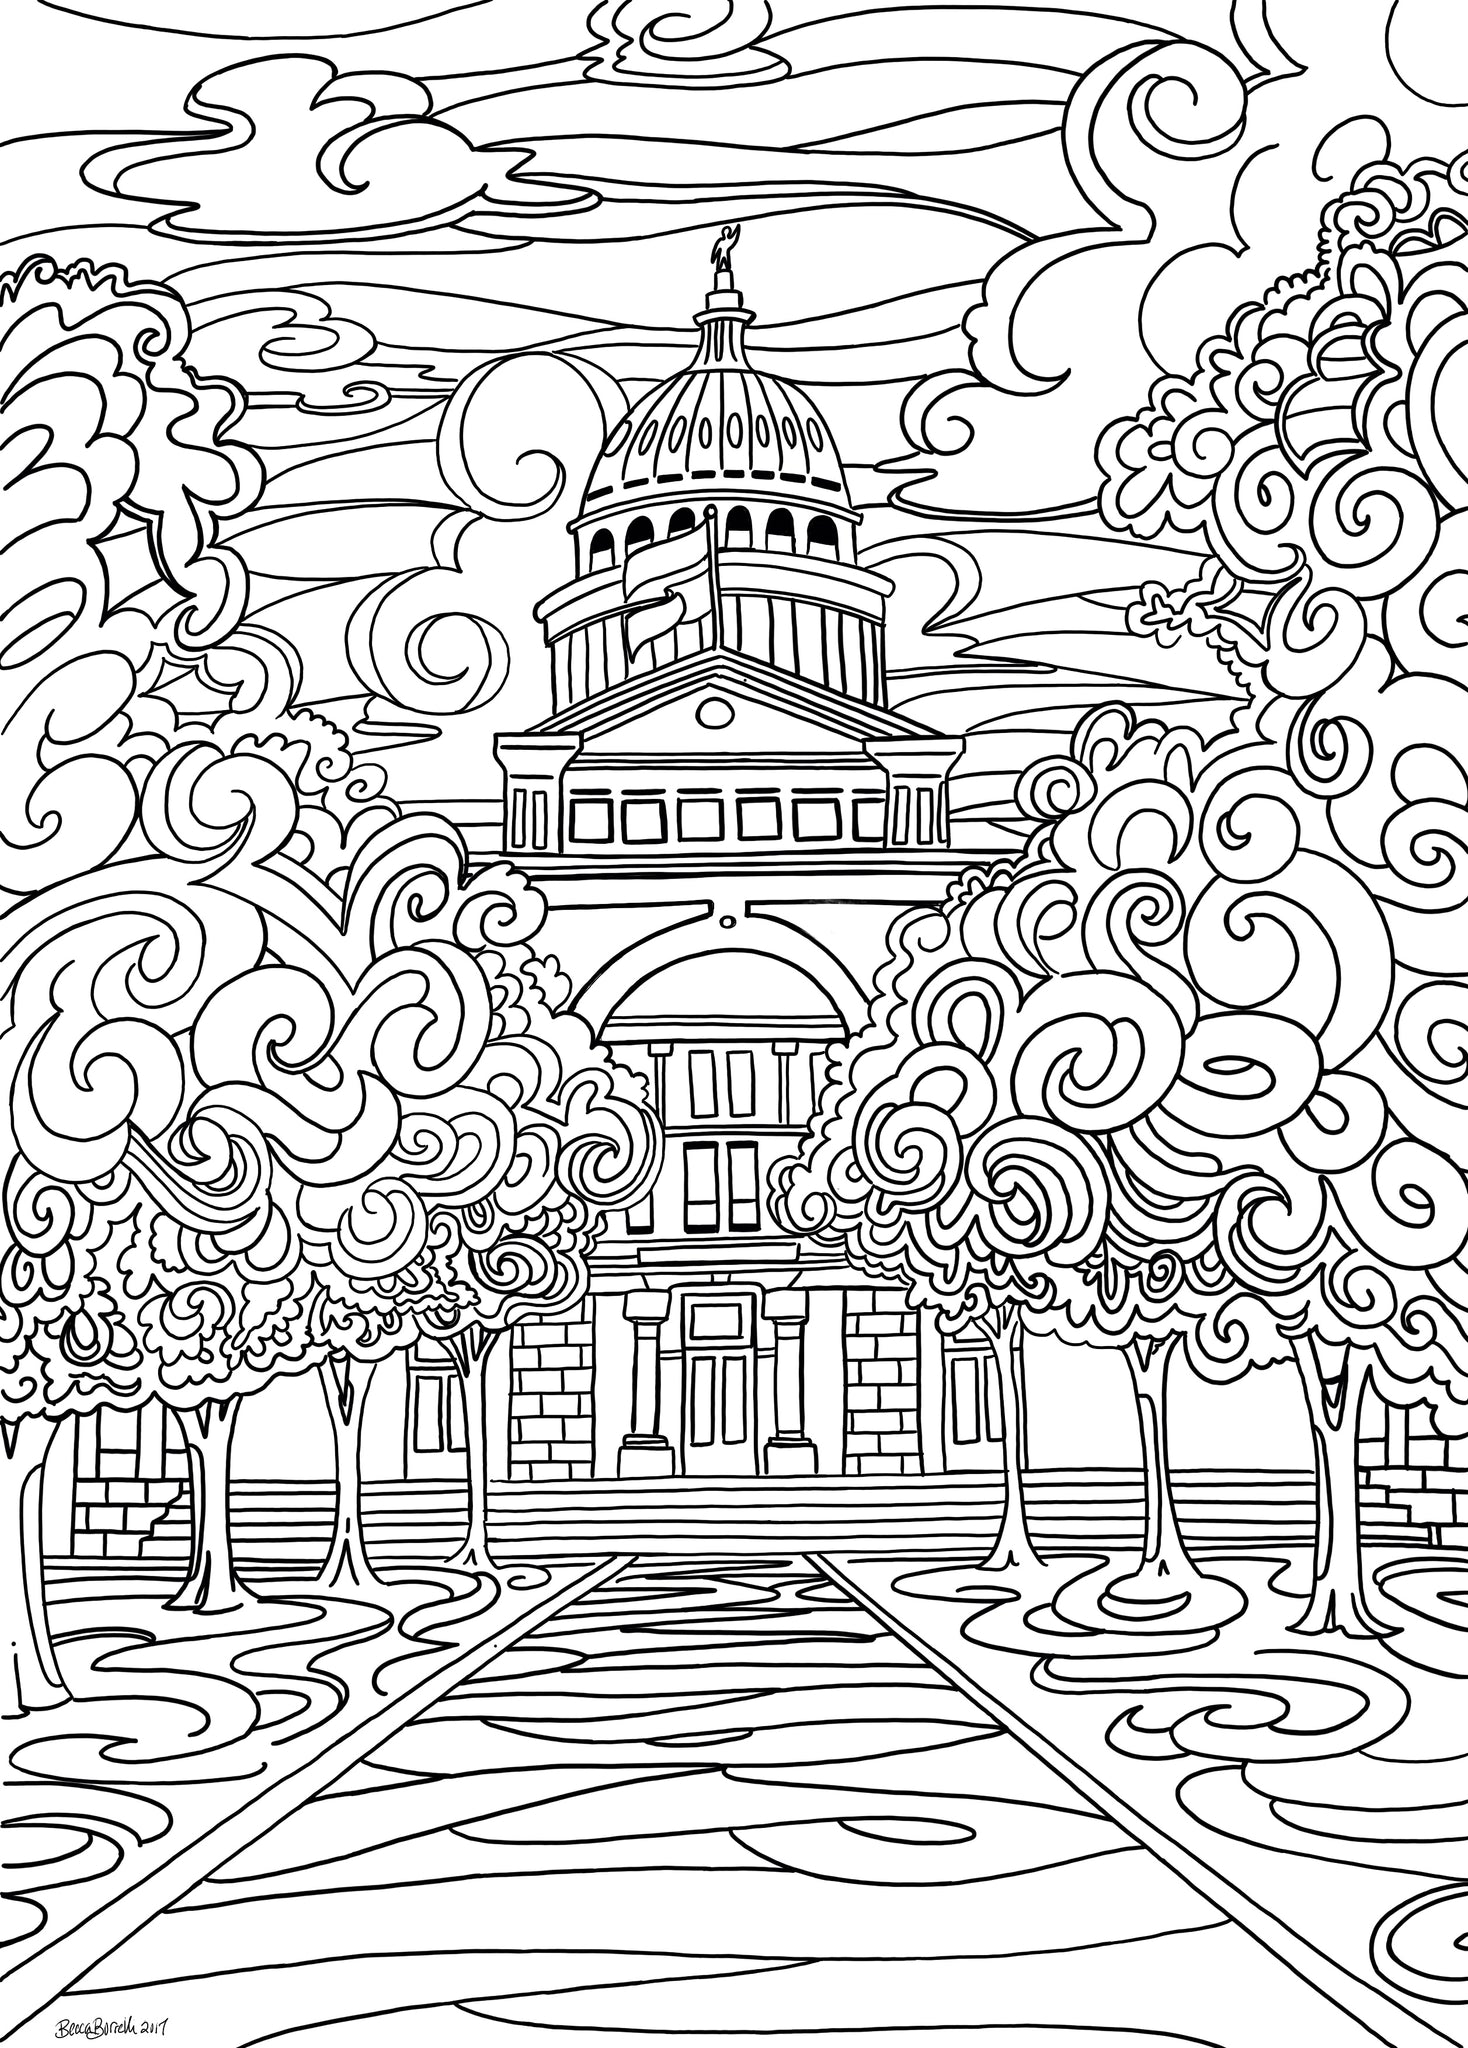 Onheart coloring page by illustrations